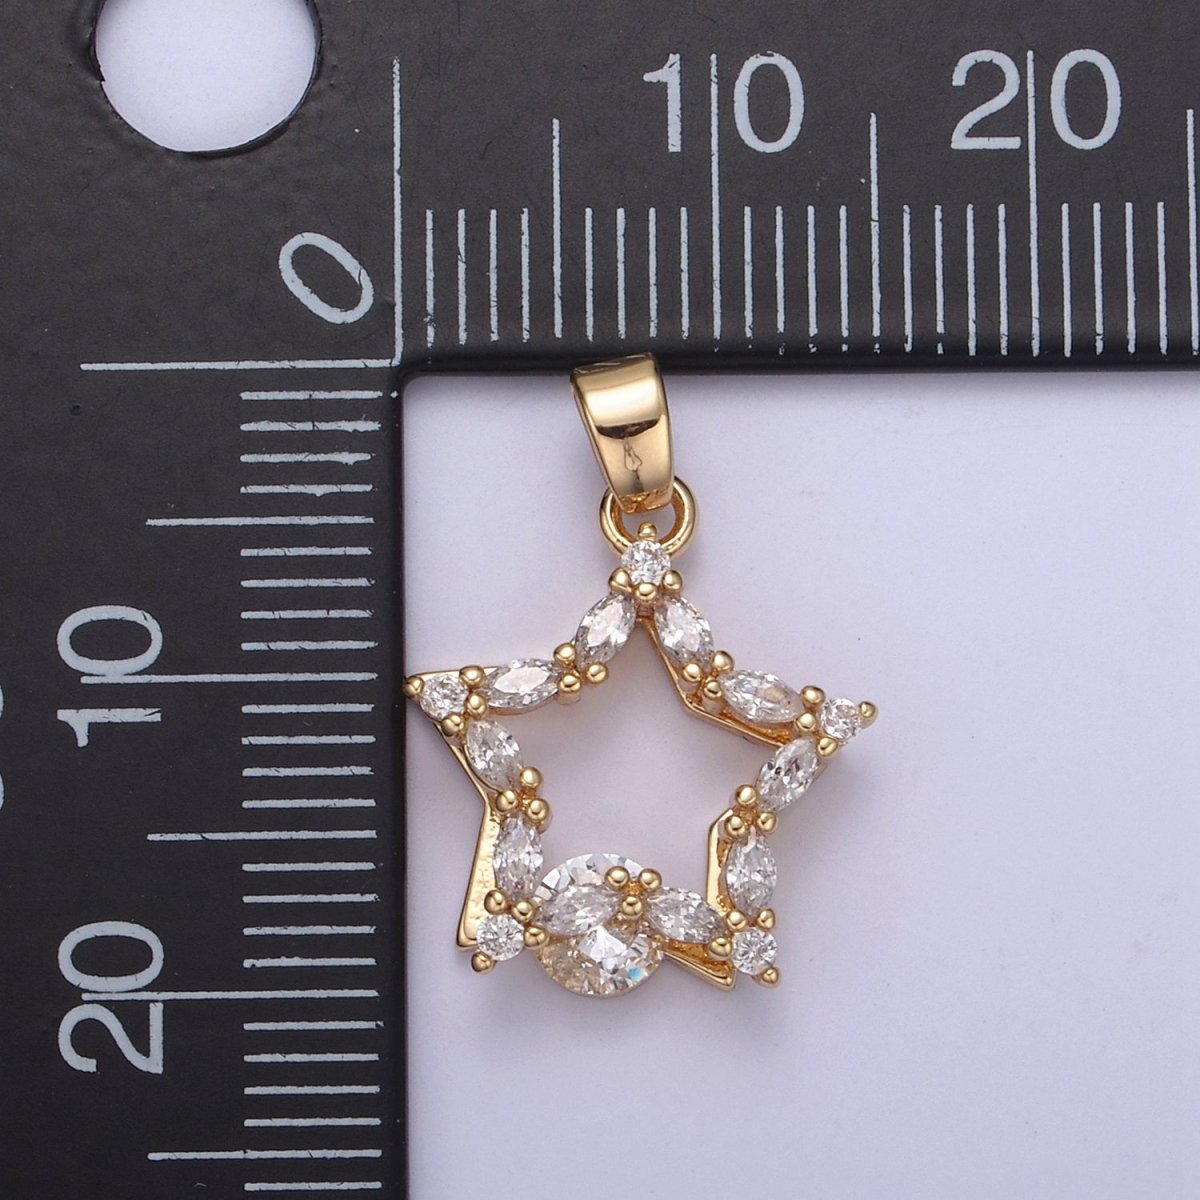 Gold Filled Star Cubic Zirconia Charm - CZ Shiny Star Celestial Night Sky Constellation Galaxy Wholesale Charms H-419 - DLUXCA